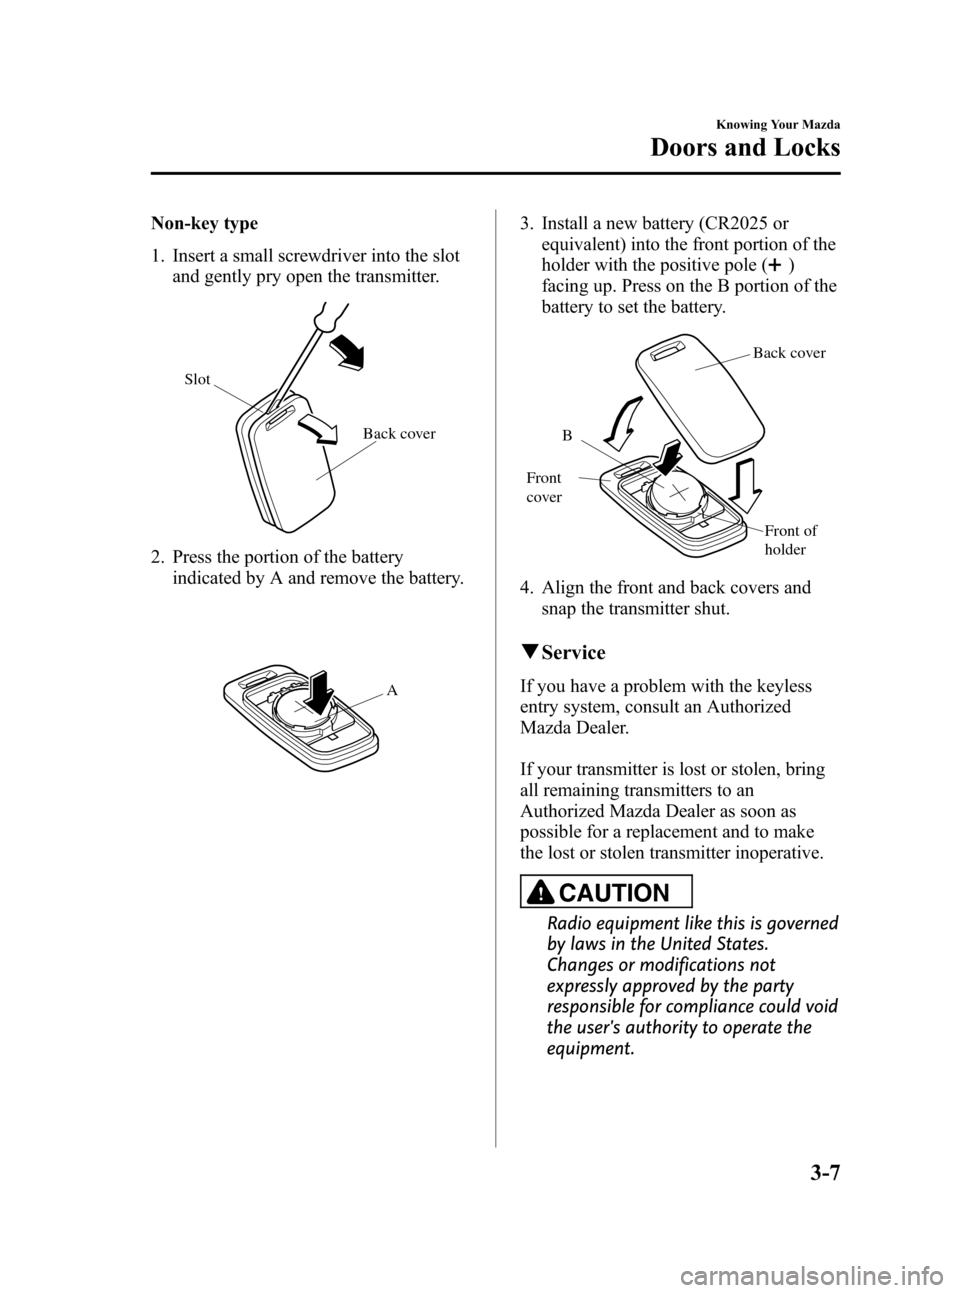 MAZDA MODEL 3 HATCHBACK 2008   (in English) Manual PDF Black plate (79,1)
Non-key type
1. Insert a small screwdriver into the slot
and gently pry open the transmitter.
Back cover Slot
2. Press the portion of the battery
indicated by A and remove the batte